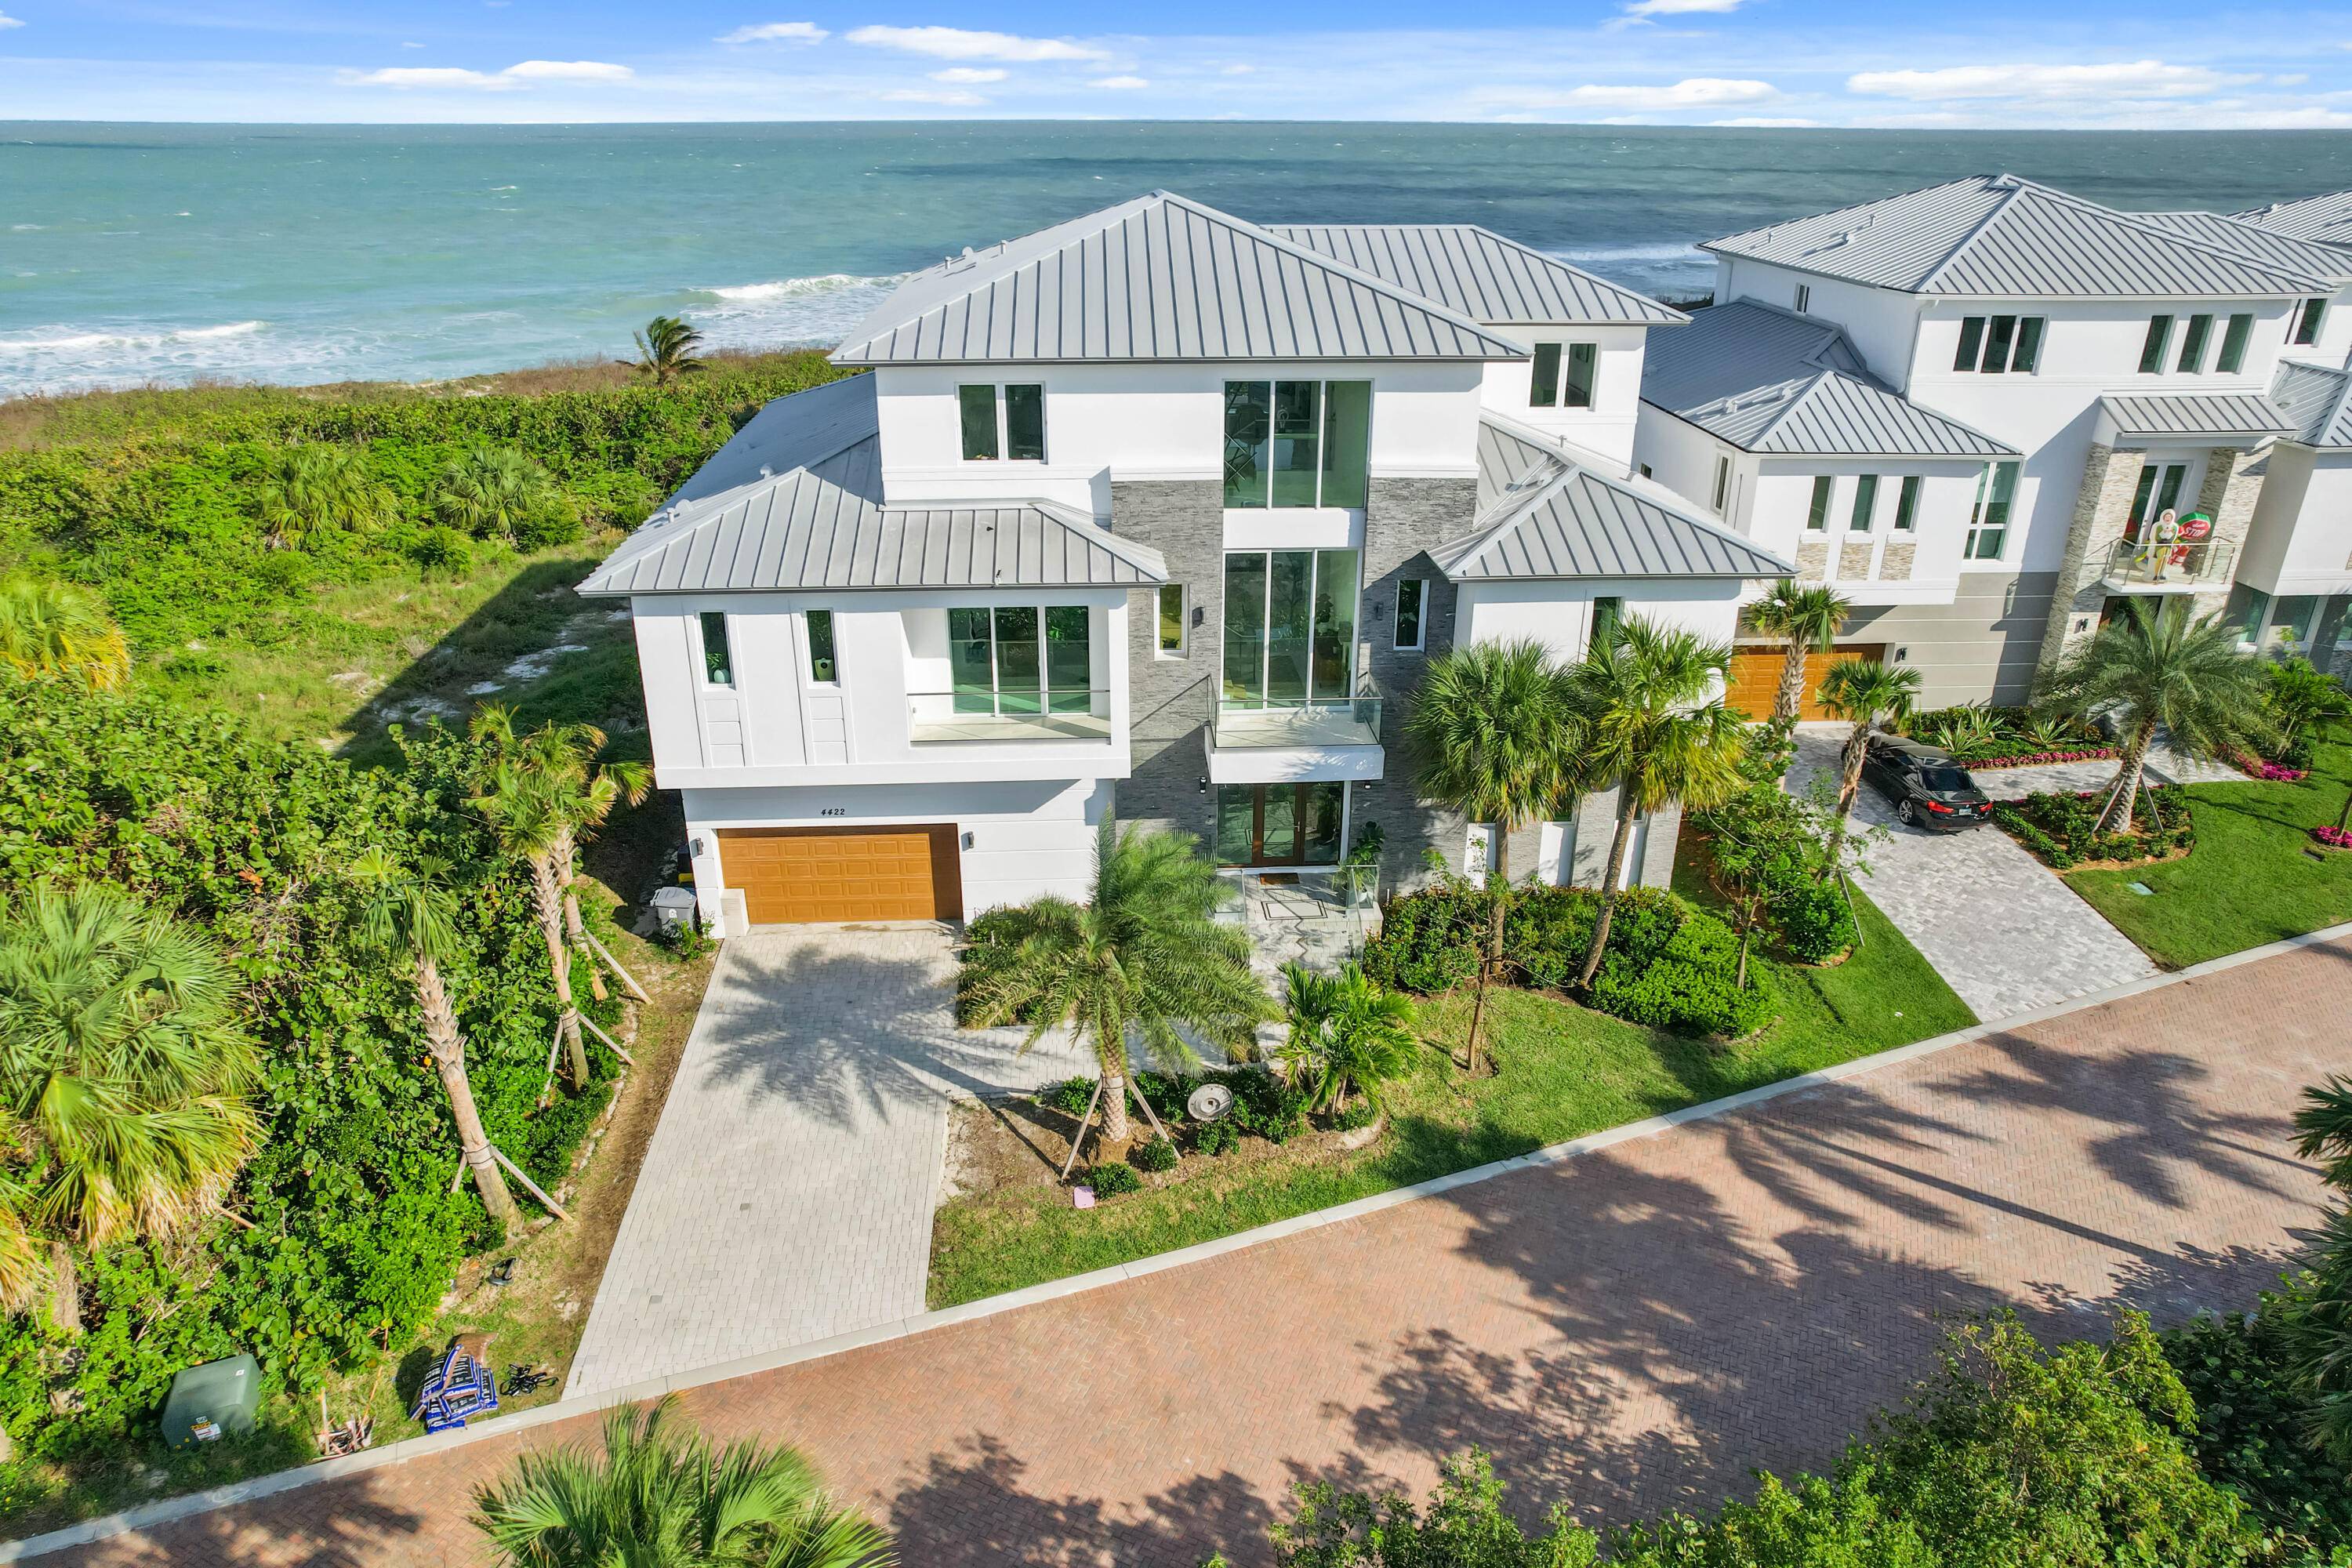 Indulge in coastal luxury with this newly built in 2022, over 10, 250 tot sq', oceanfront retreat in the Aquavista community of North Hutchinson Island.